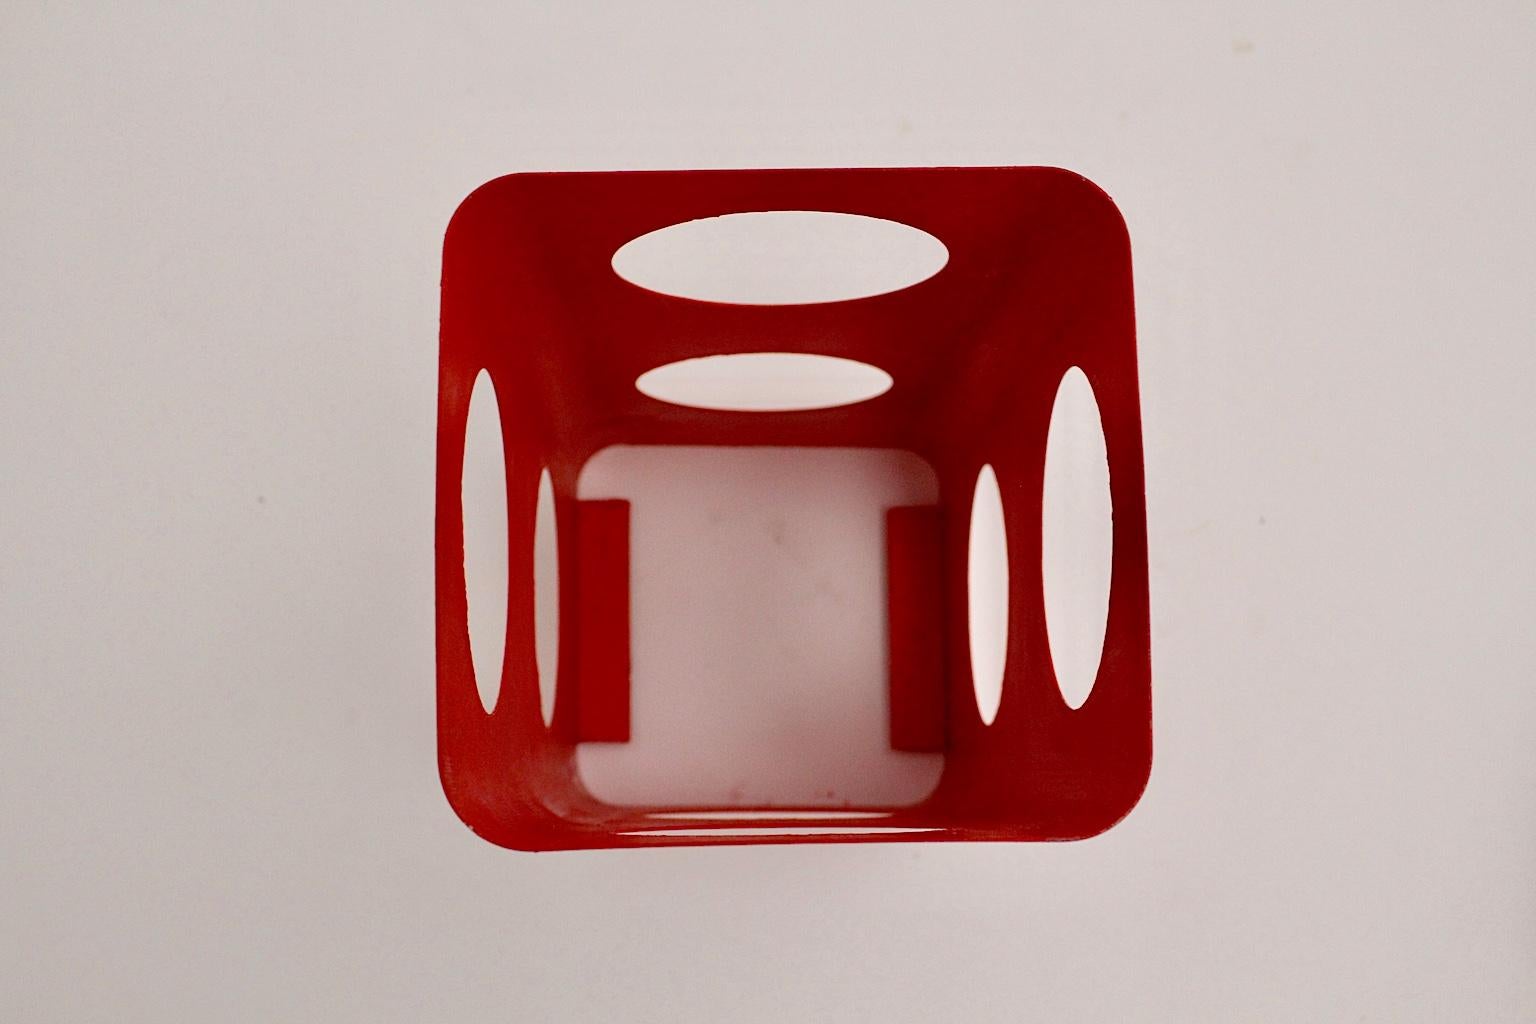 Space Age Red Metal Vintage Umbrella Stand, 1970s, Austria For Sale 2